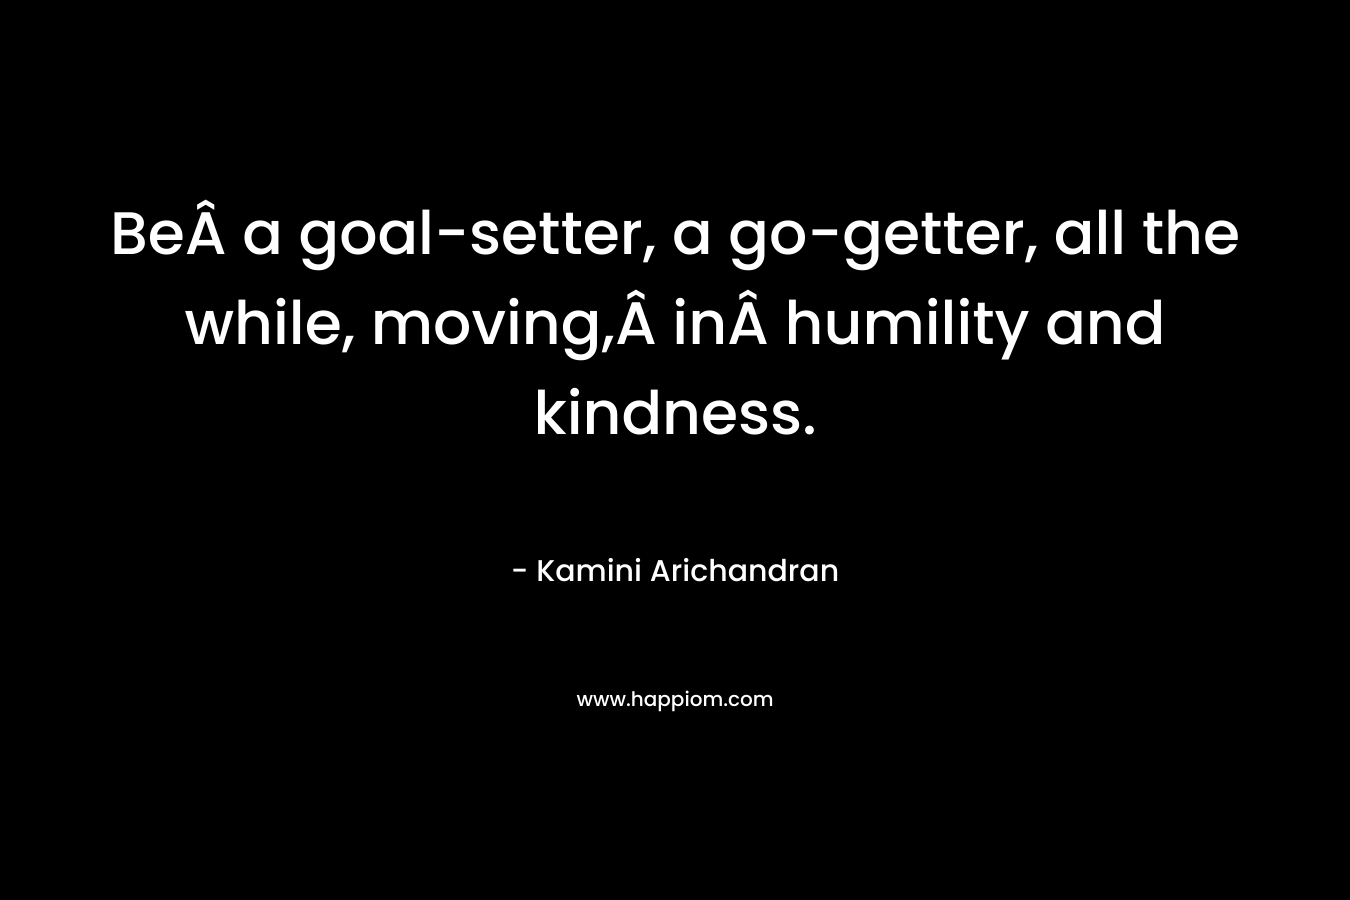 BeÂ a goal-setter, a go-getter, all the while, moving,Â inÂ humility and kindness. – Kamini Arichandran